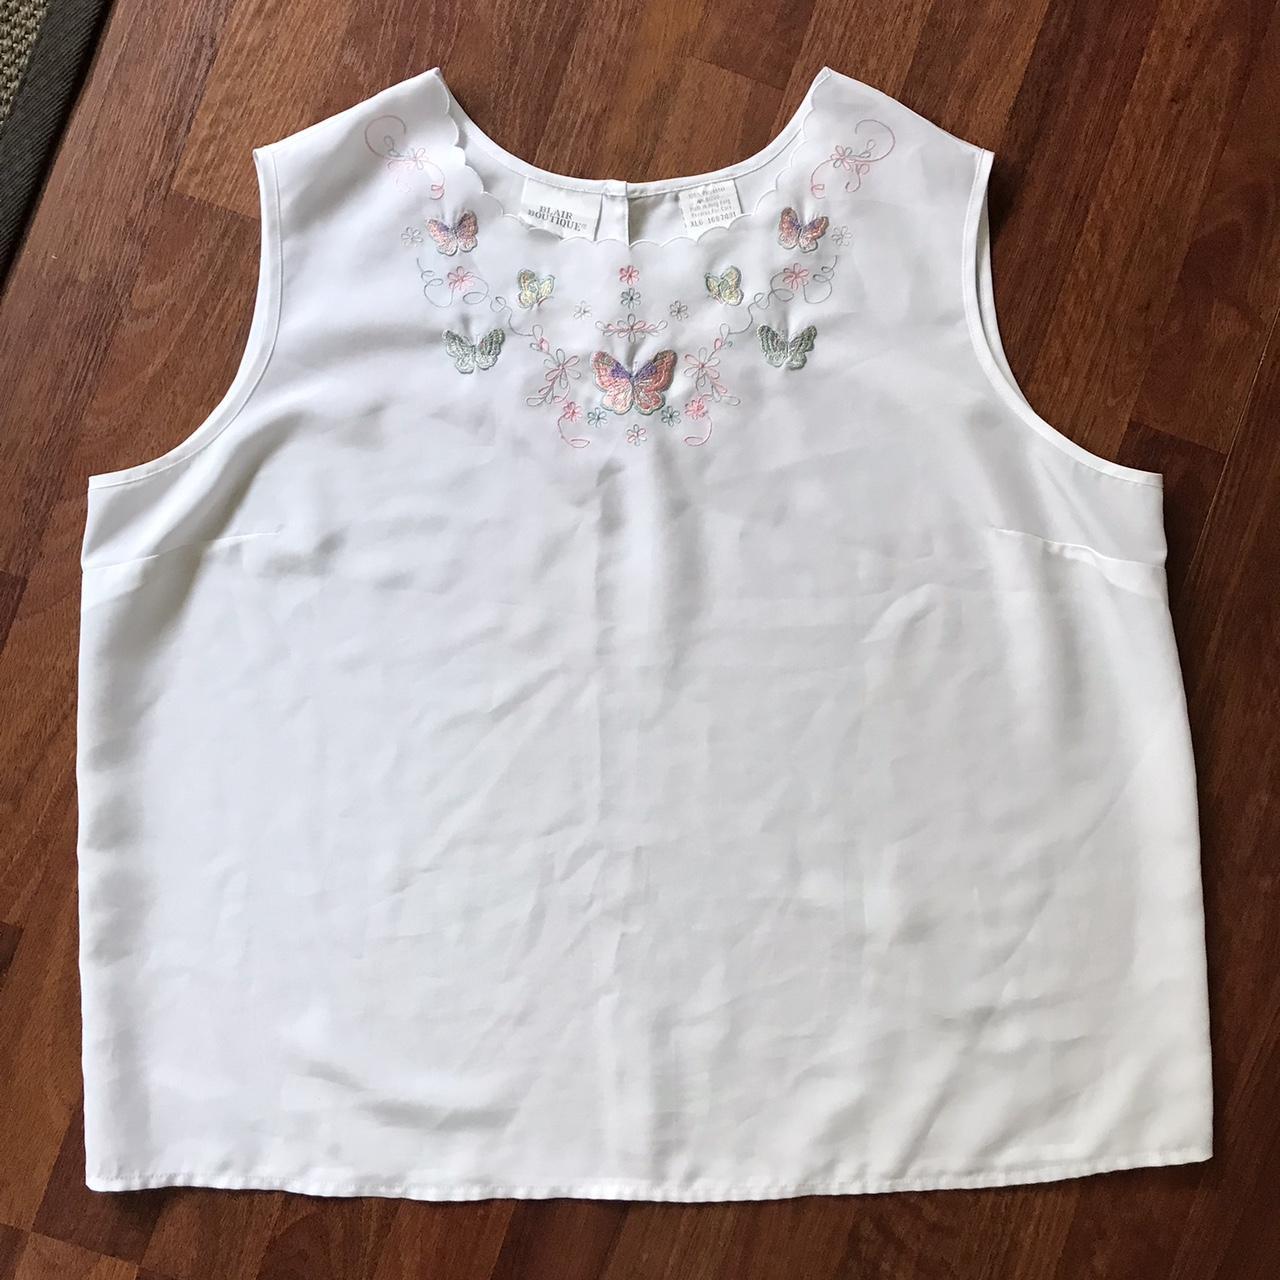 Blair Women's White and Pink Vest